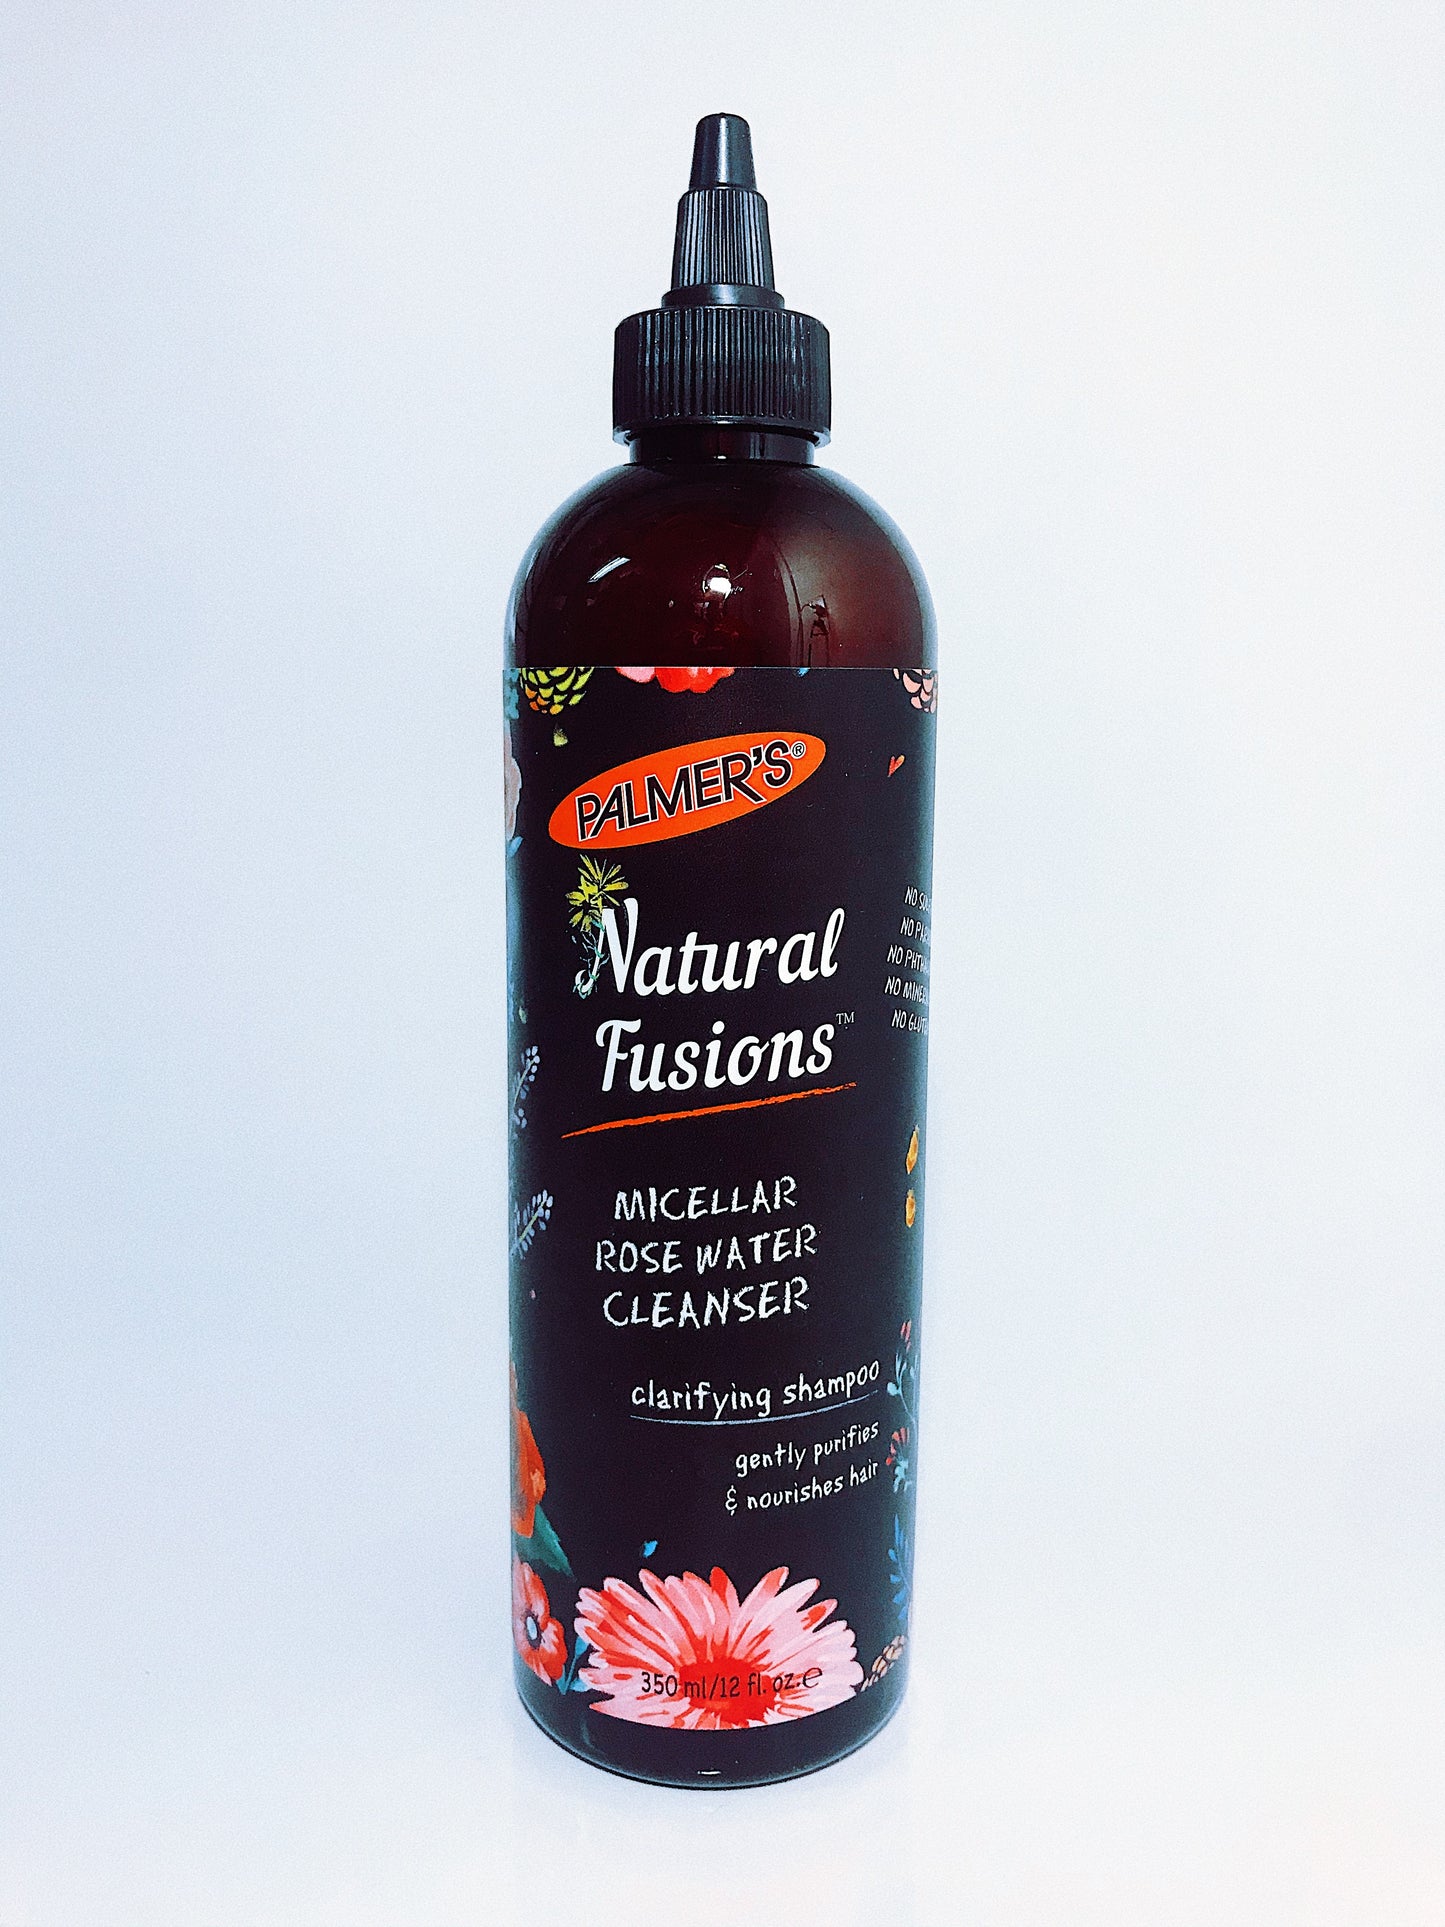 Palmer's Natural Fusions Micellar Rose Water Cleanser